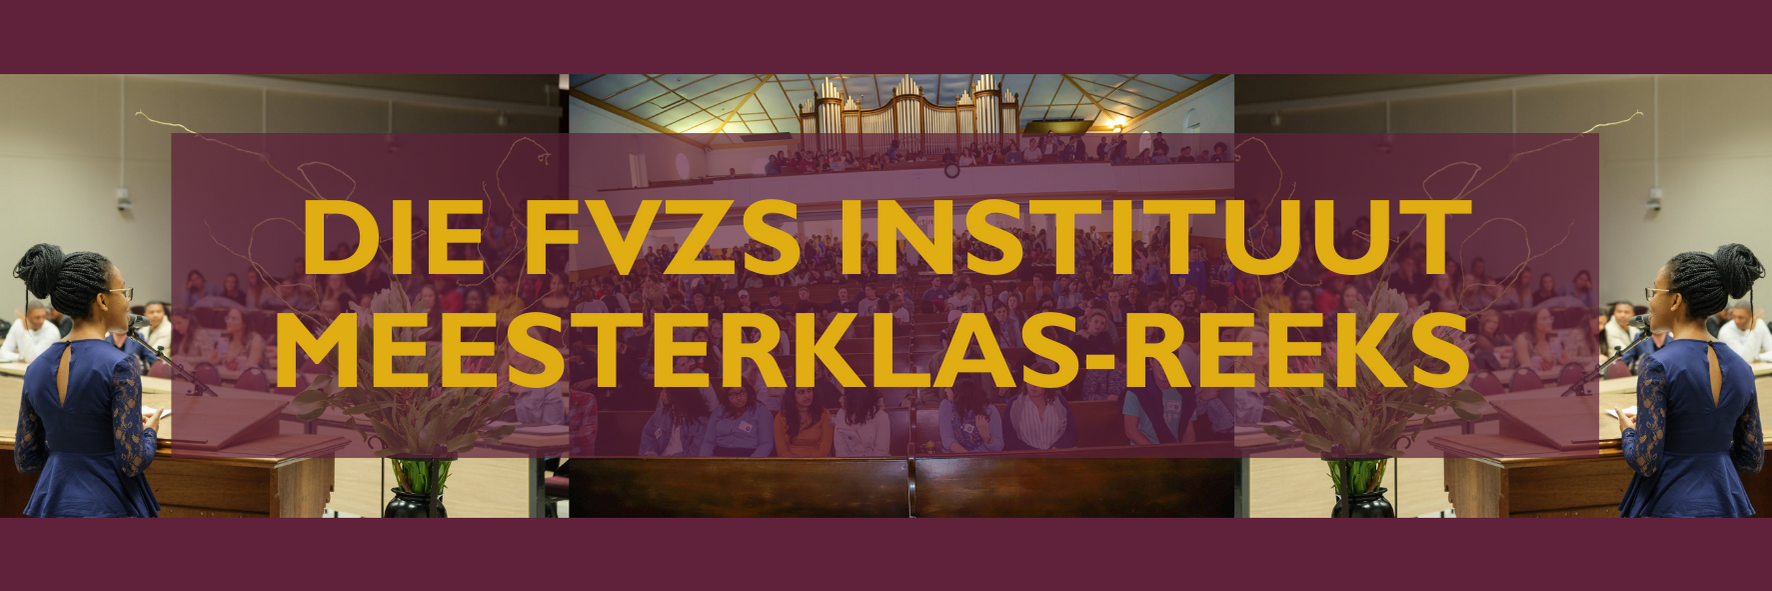 Masterclass_FVZS Banners.png